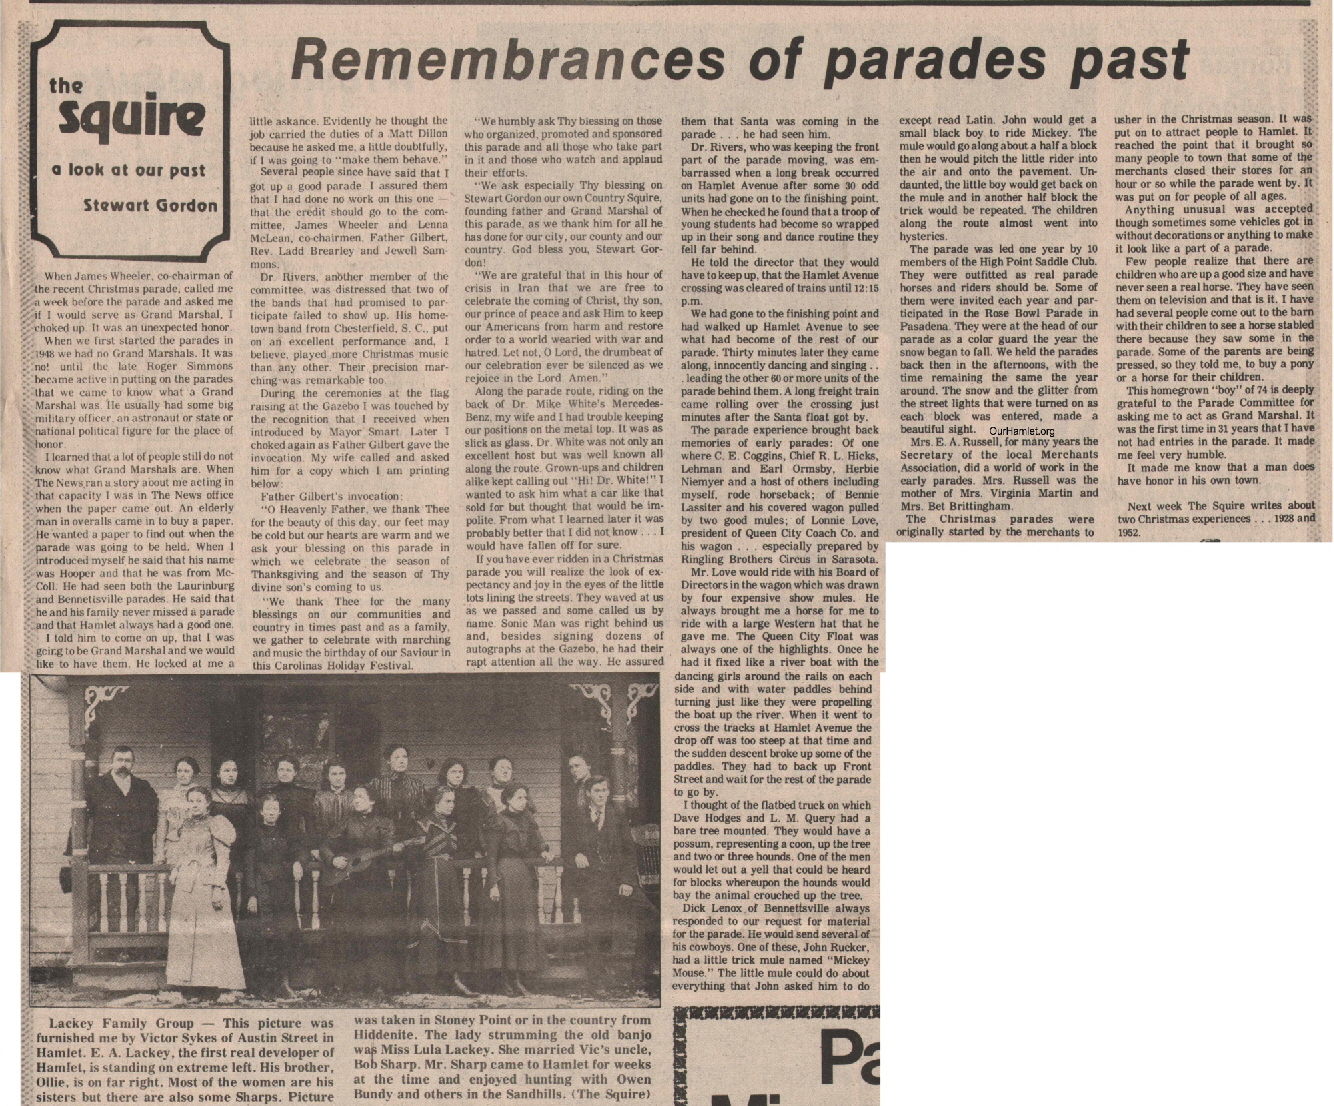 The Squire - Remembrances of parades past OH